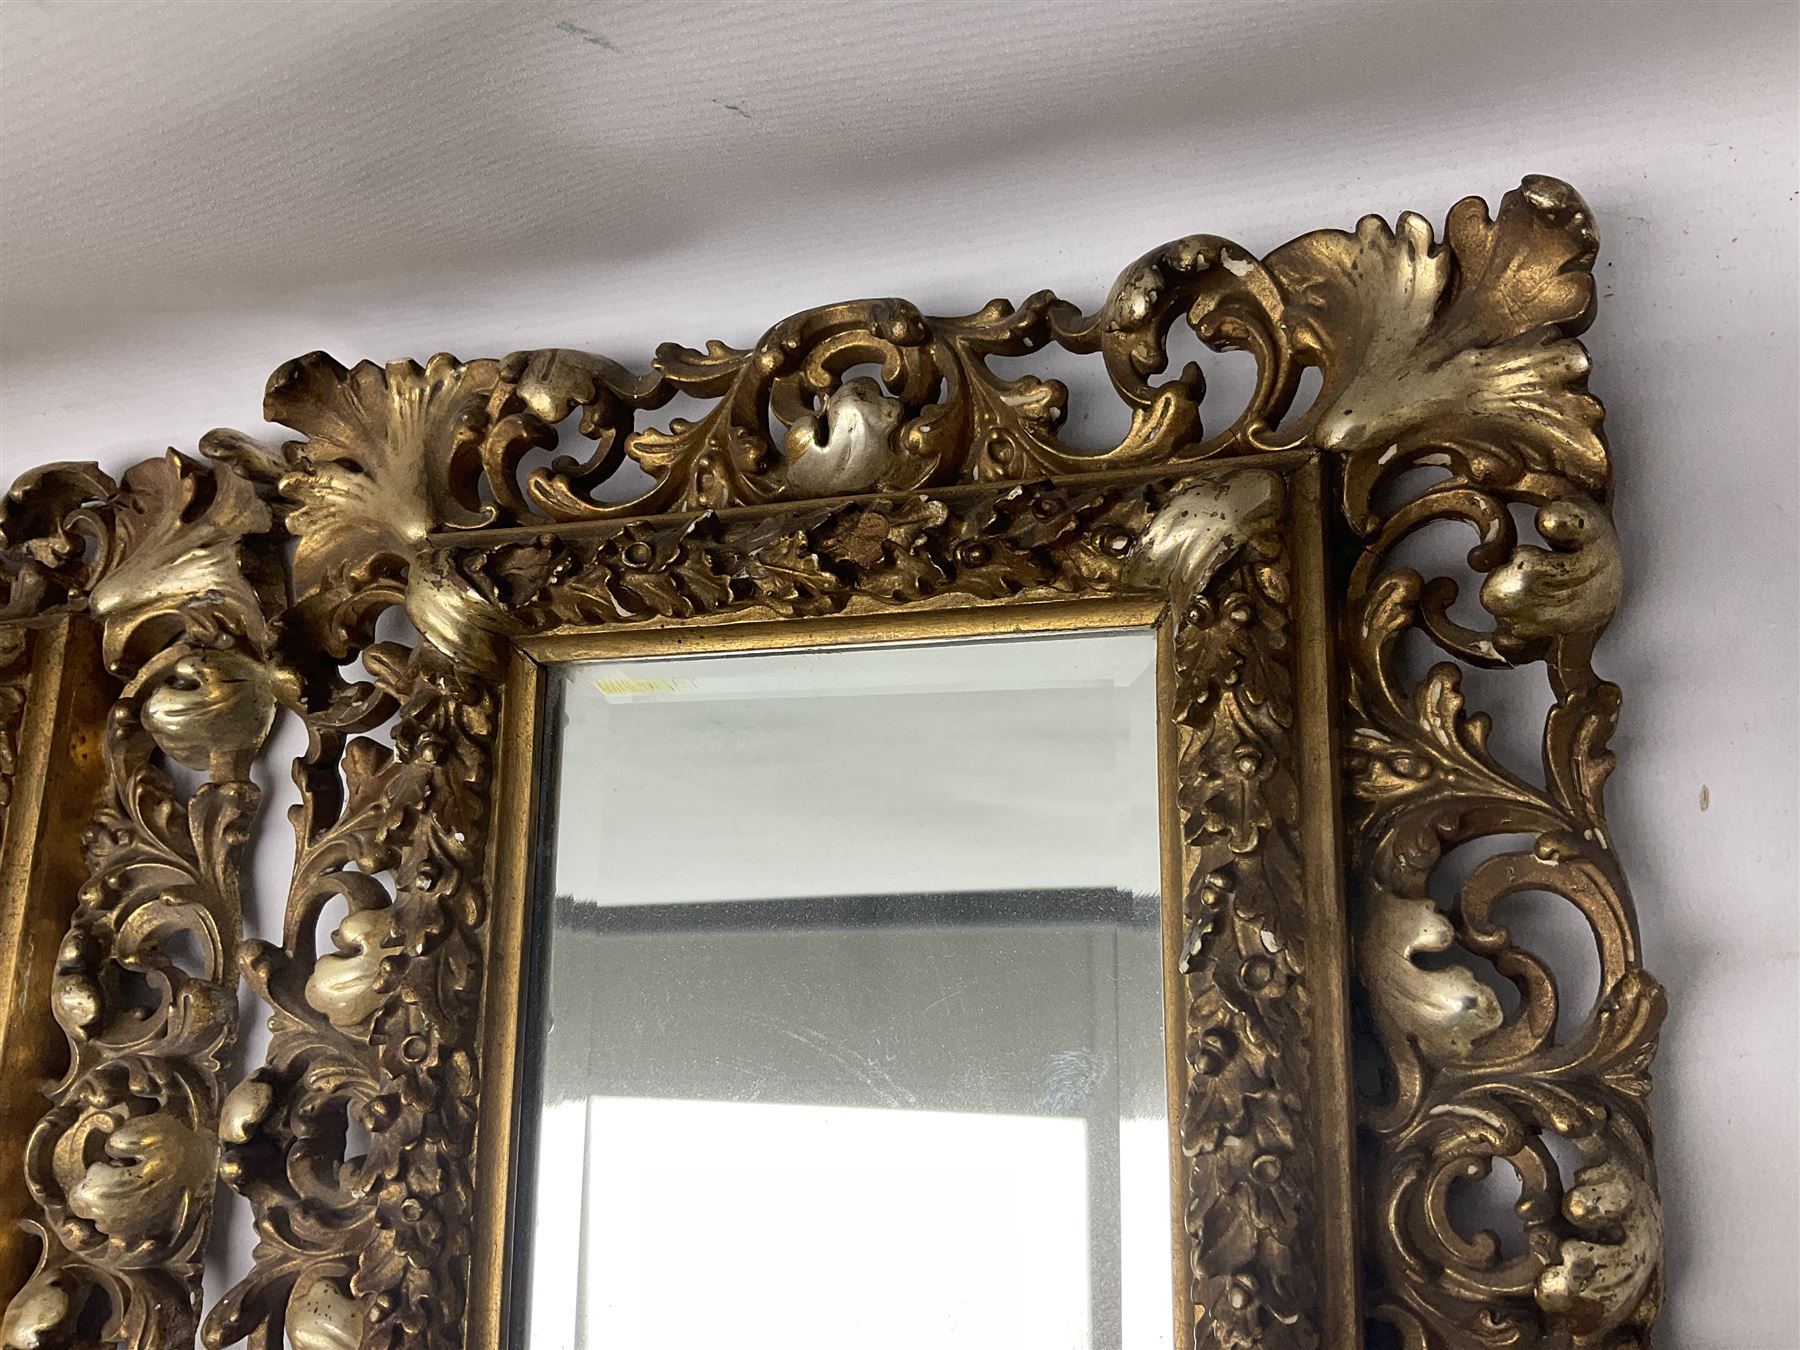 Pair of Florentine carved giltwood mirrors - Image 5 of 11